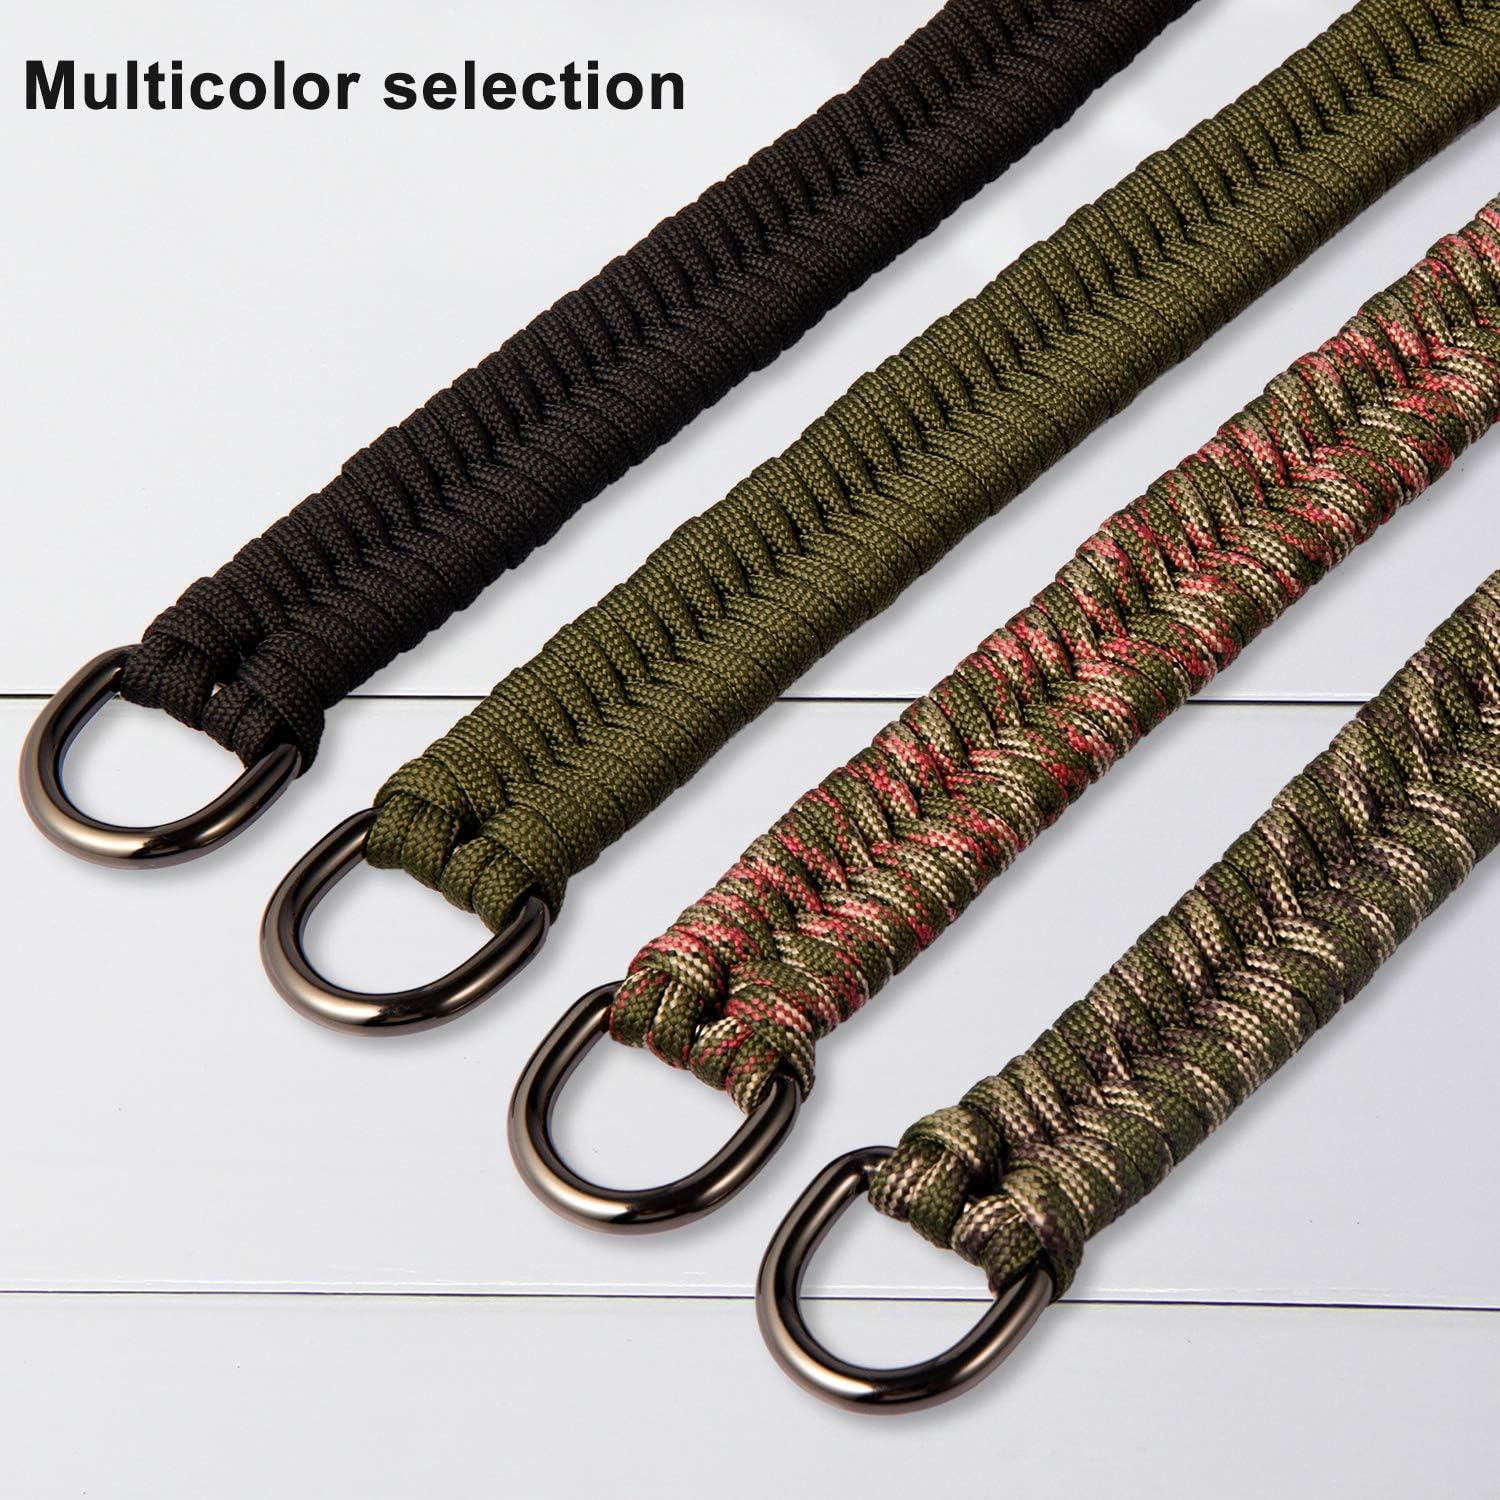 Paracord EDC Handphone Camera Strap Come With Heavy Duty Magnets & Safety  Hook ✓ 100% HANDMADE IN SG🇸🇬 ✓ 4 Colours ~5mm Cord ✓FREE PORTABLE ,  Mobile Phones & Gadgets, Mobile 